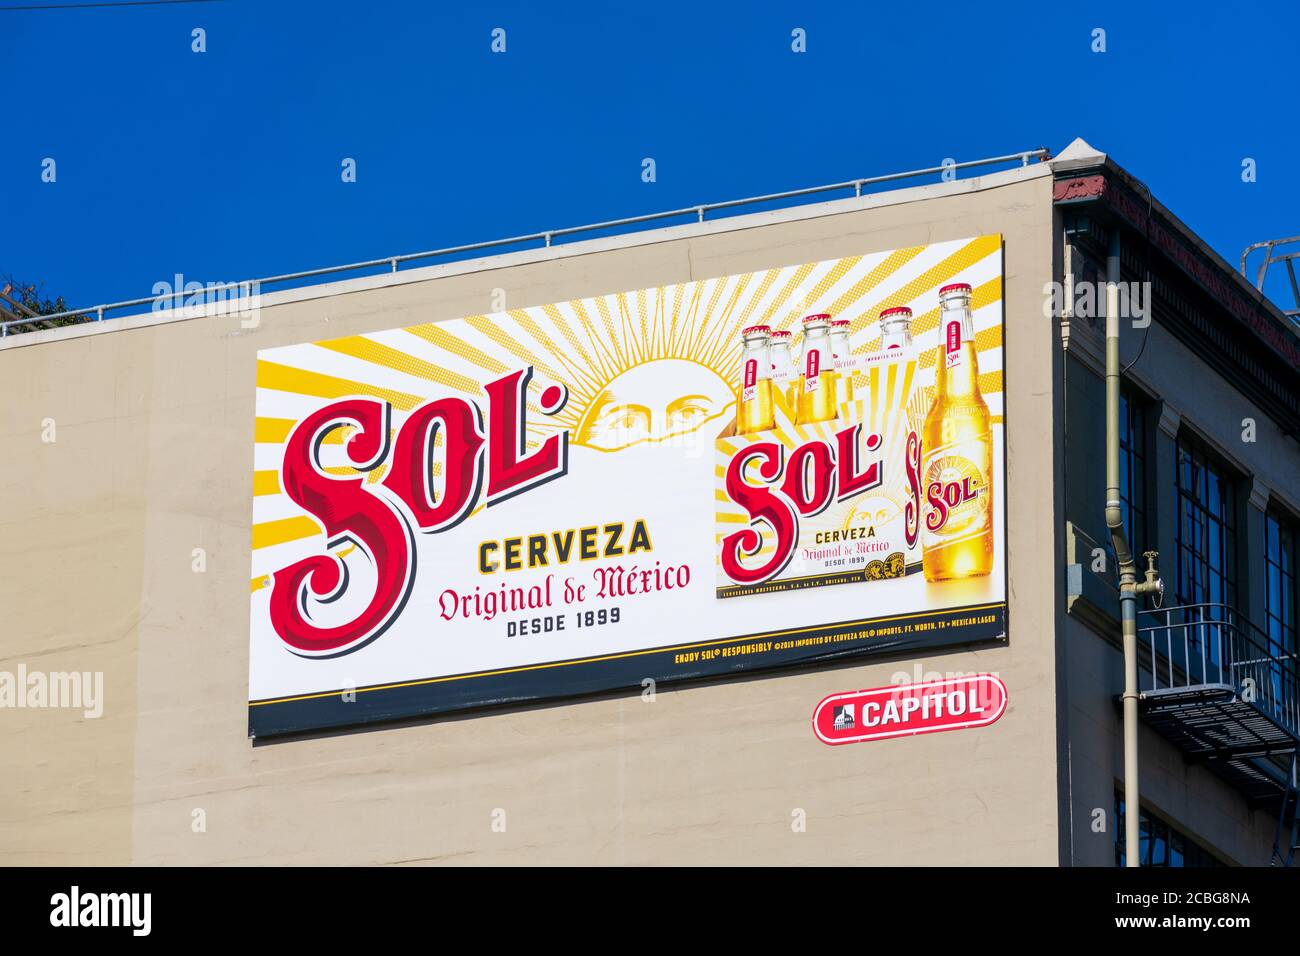 Sol beer outdoor billboard advertisement on top of a building - San Francisco, California, USA - 2020 Stock Photo